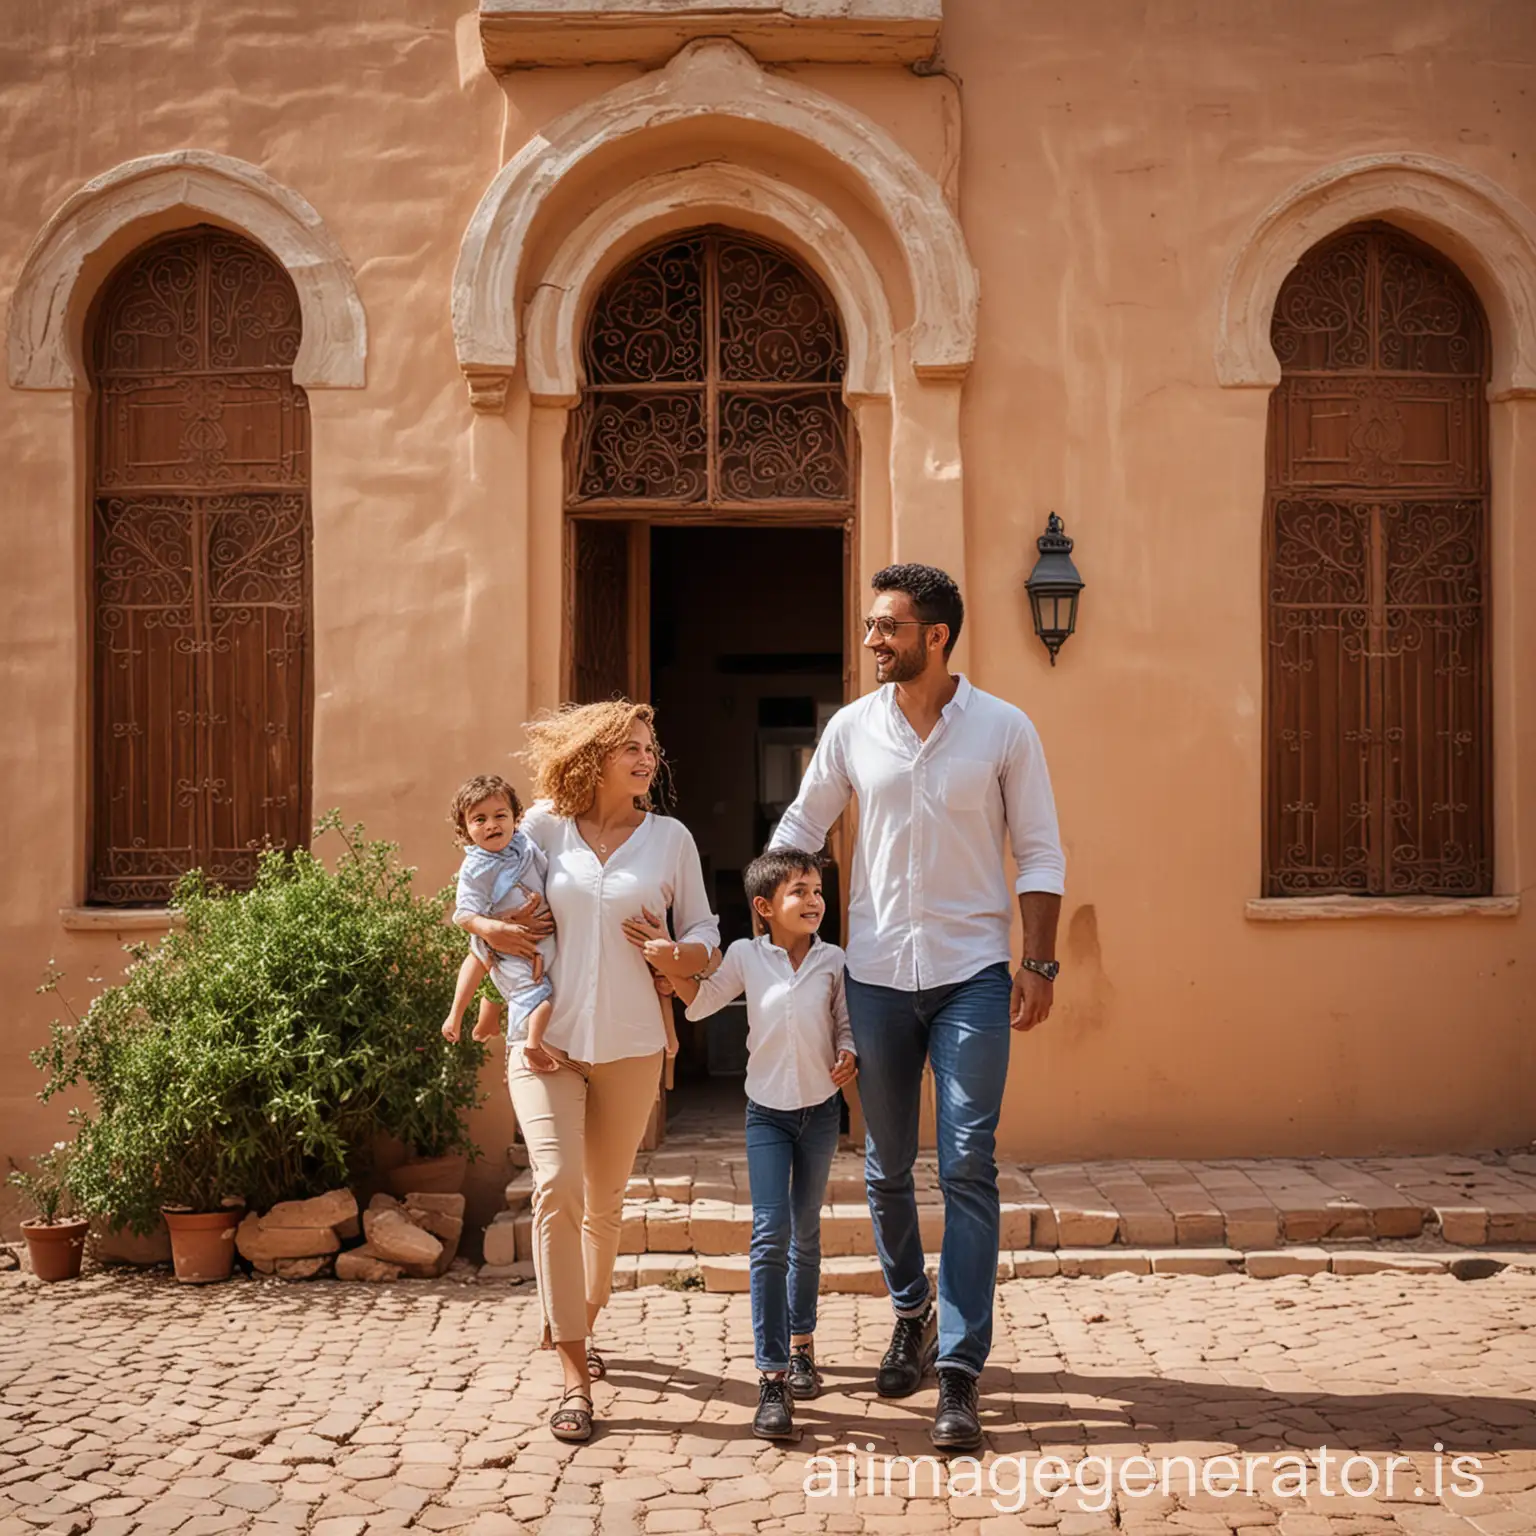 A father, mother, and their two children are protecting the family home by subscribing to real estate insurance in Morocco.